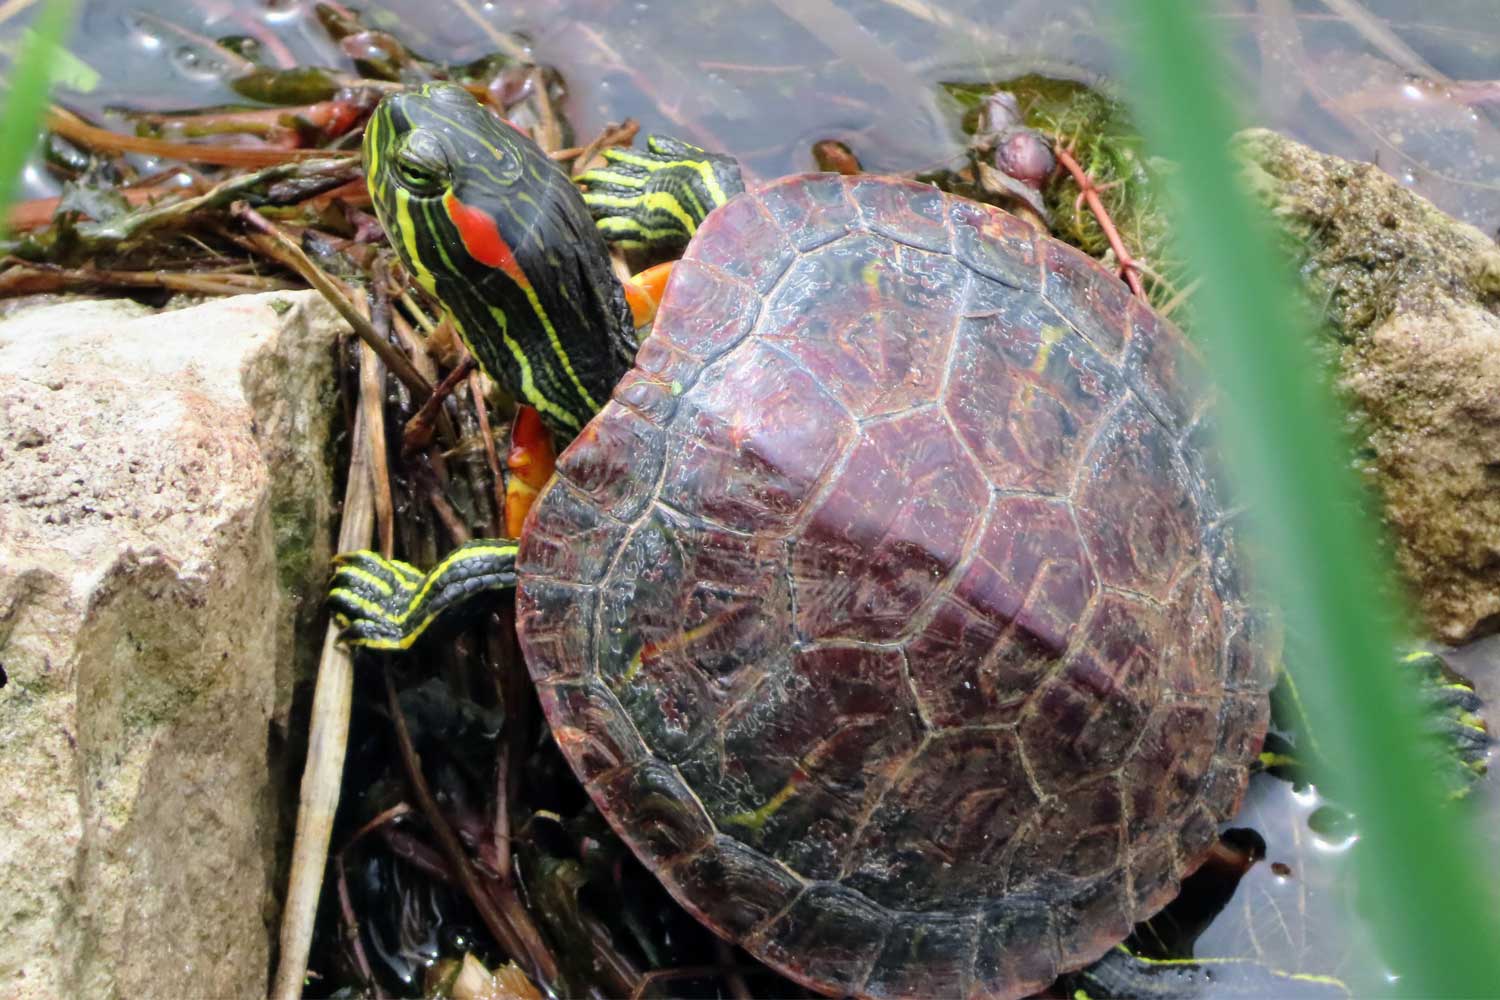 Red-eared slider standing in water next to a rock.